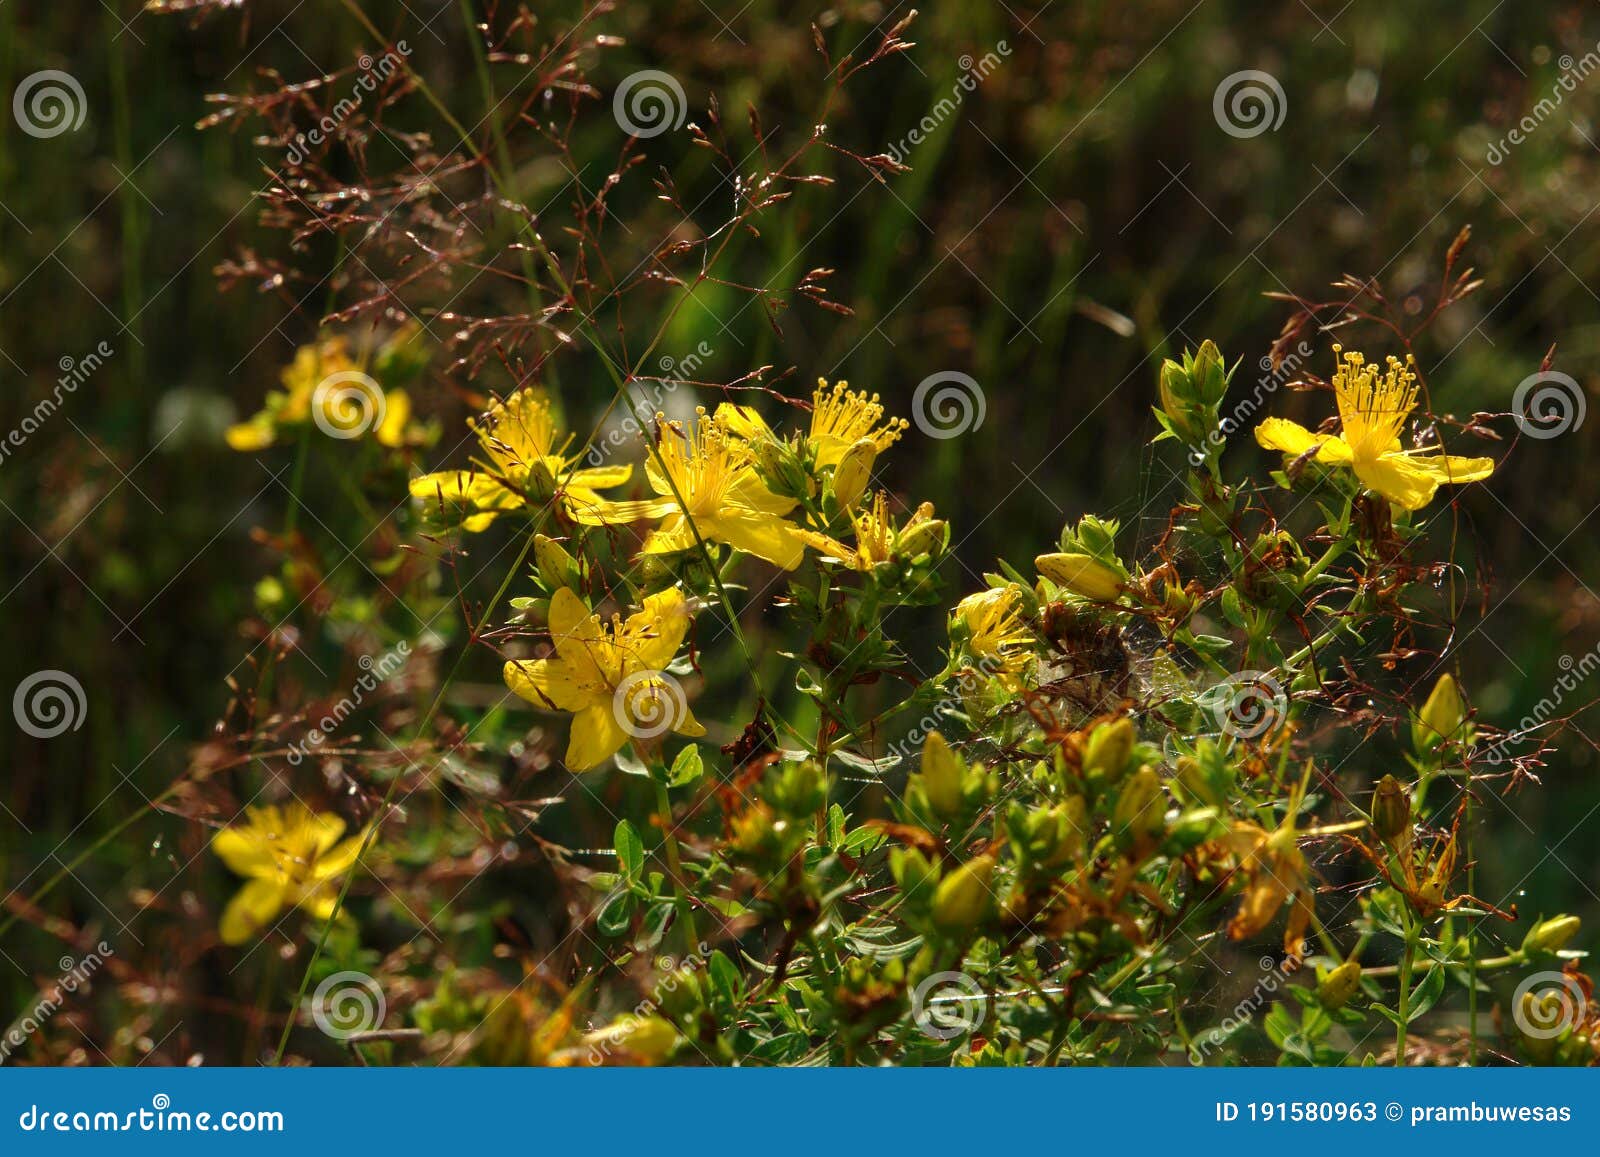 a close up of hypericum perforatum flowers (perforate st john`s-wort or common saint john`s wort) in the field